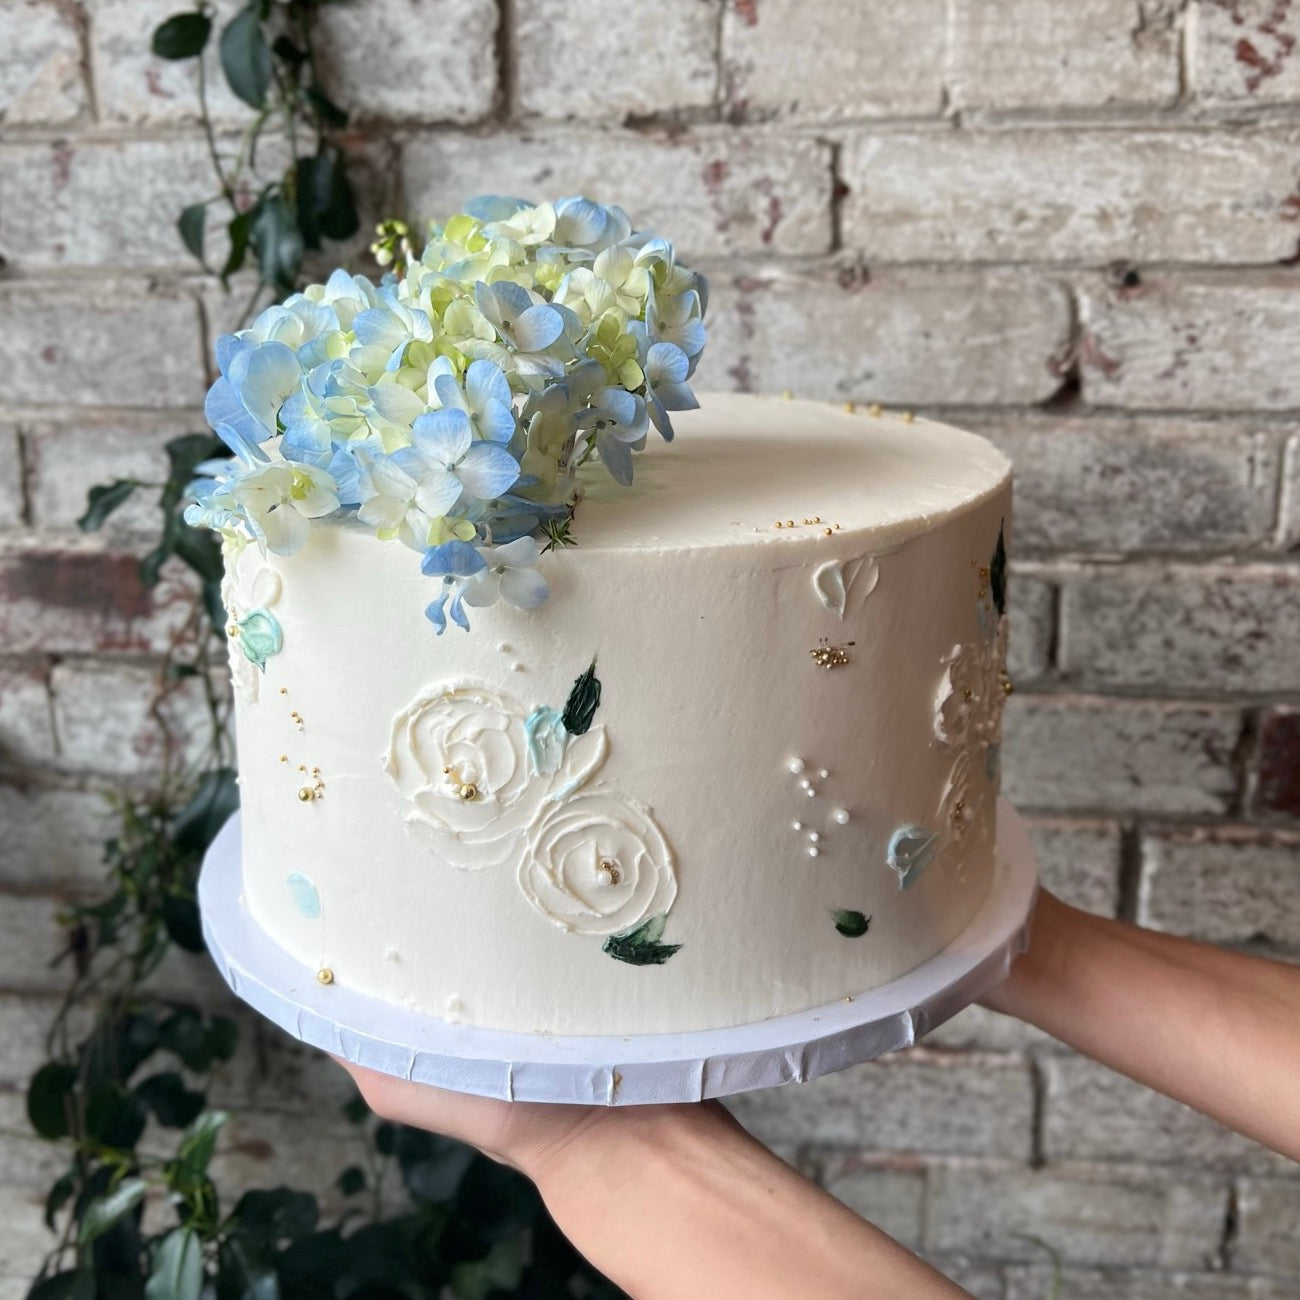 White cake with blue fresh flowers